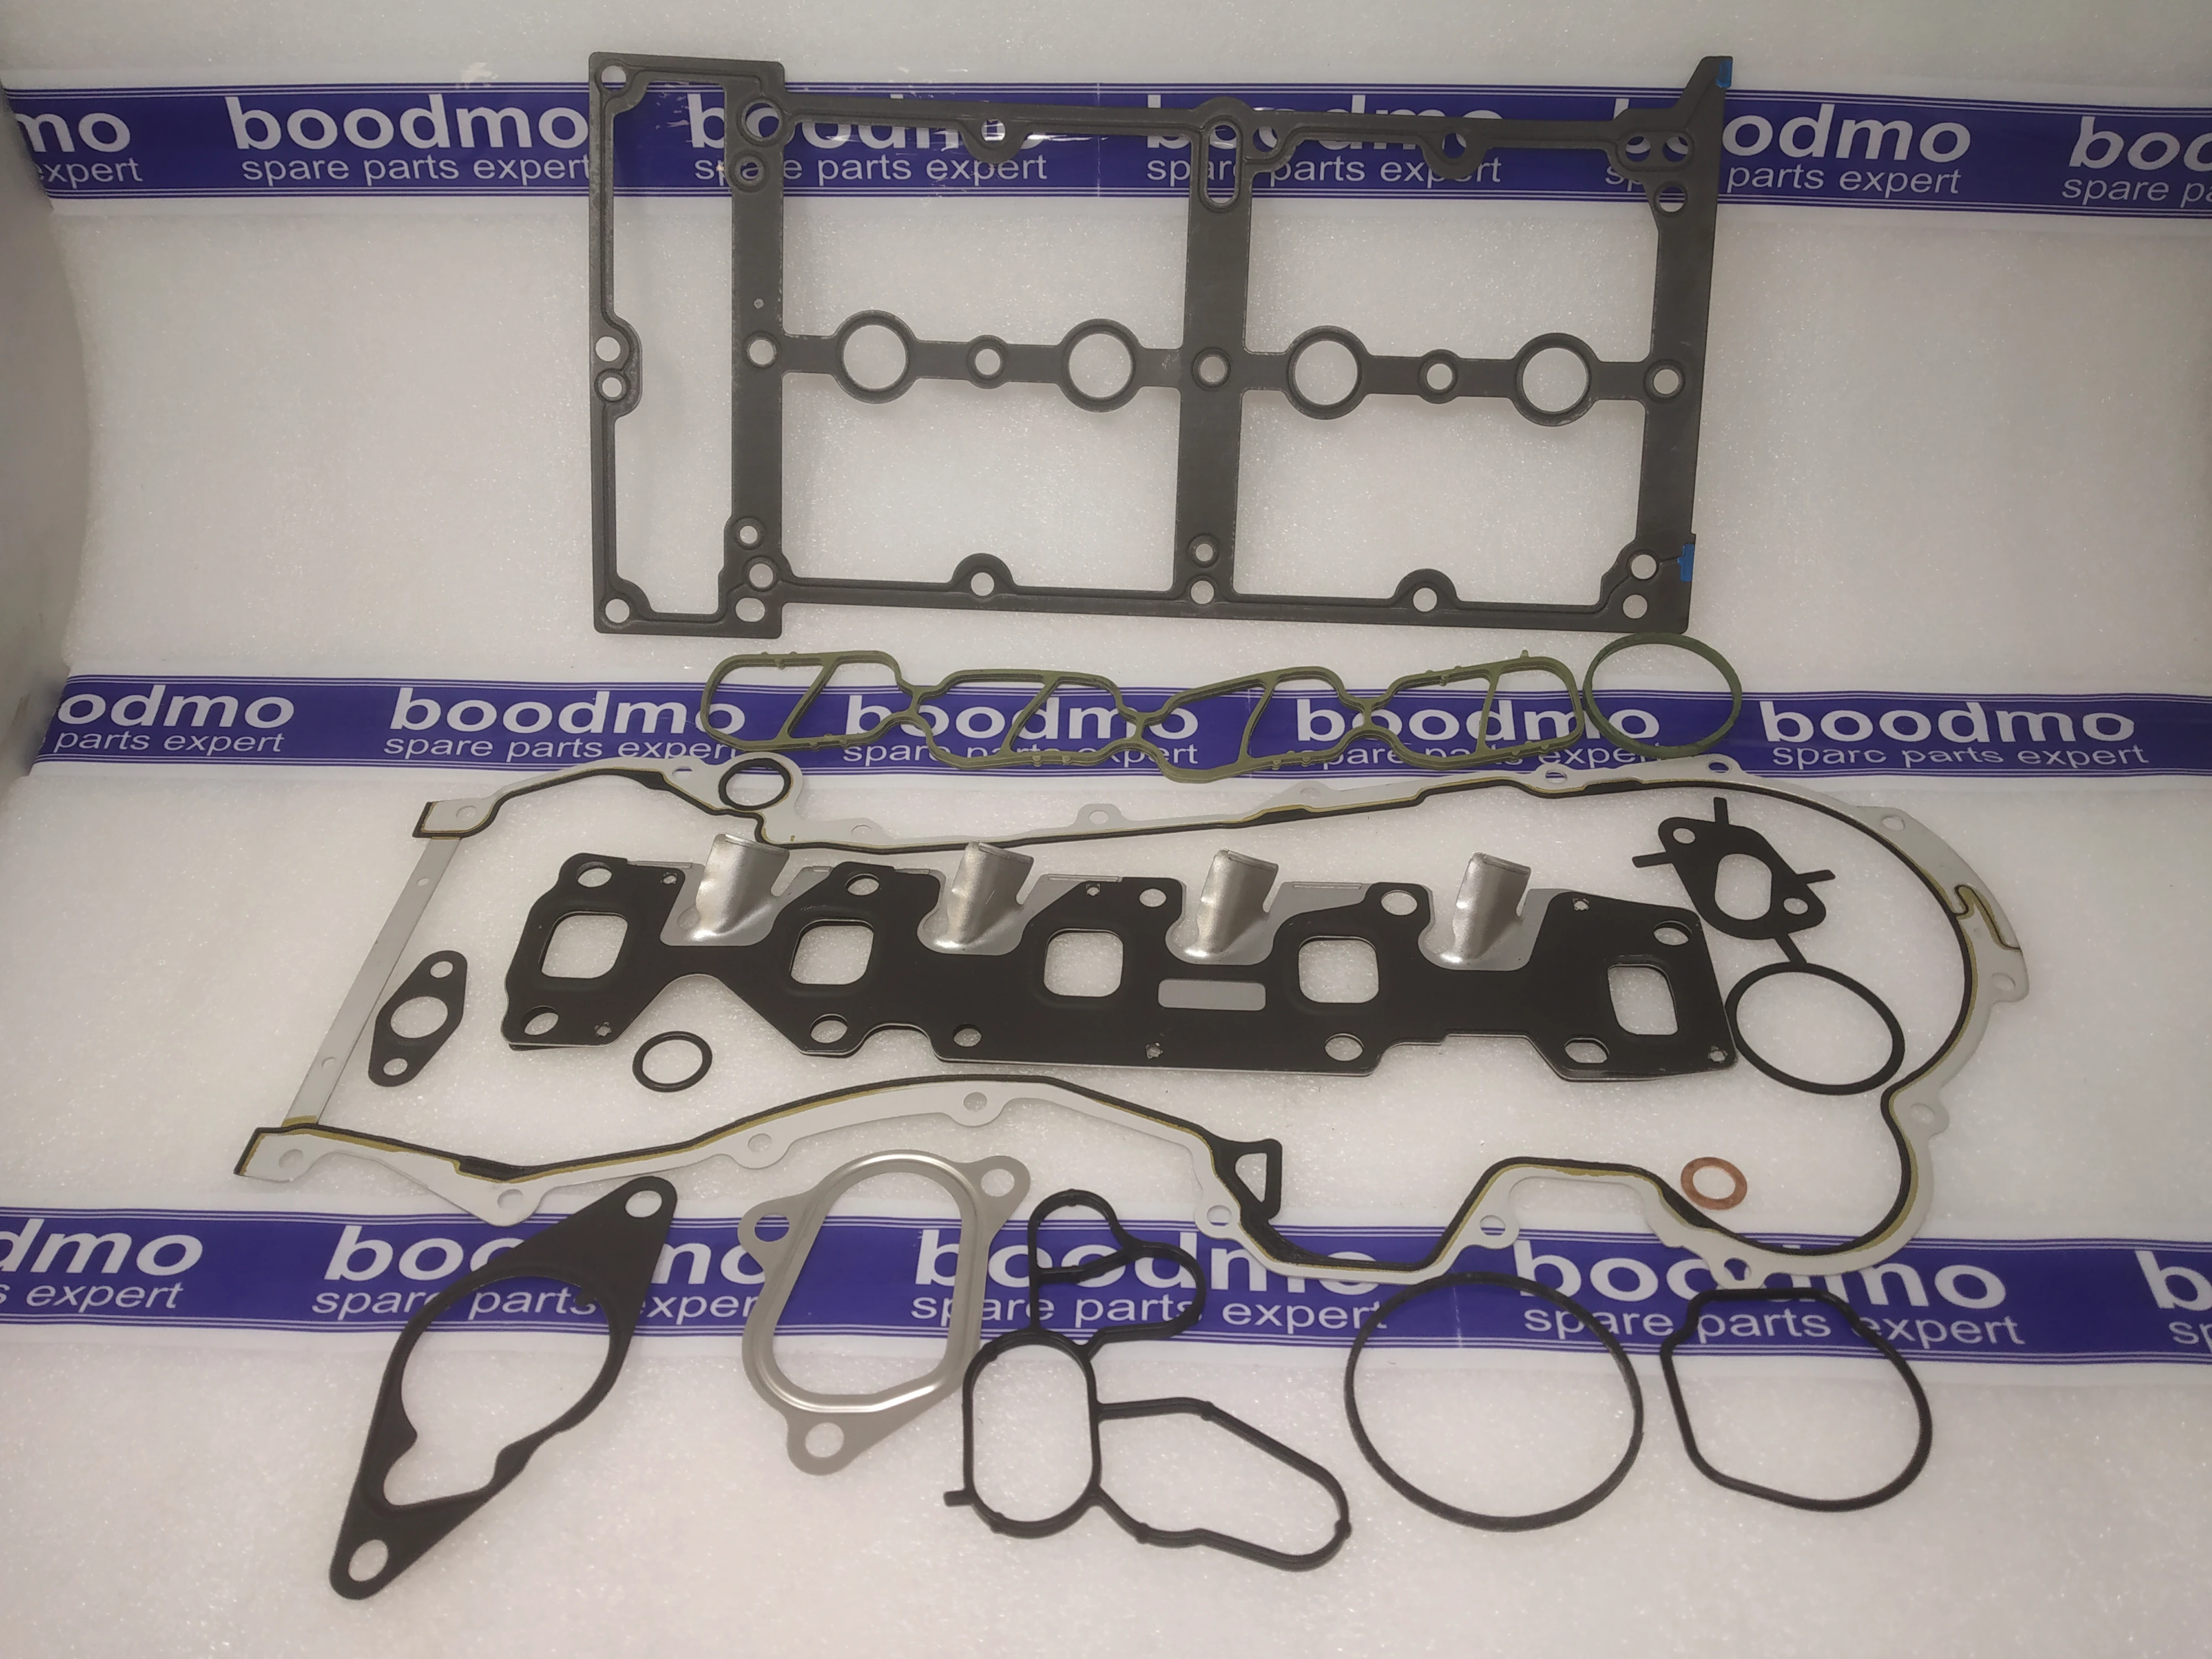 Full Gasket Set, Engine: BANCO 231 16... 00 AST -compatibility, features,  prices. boodmo